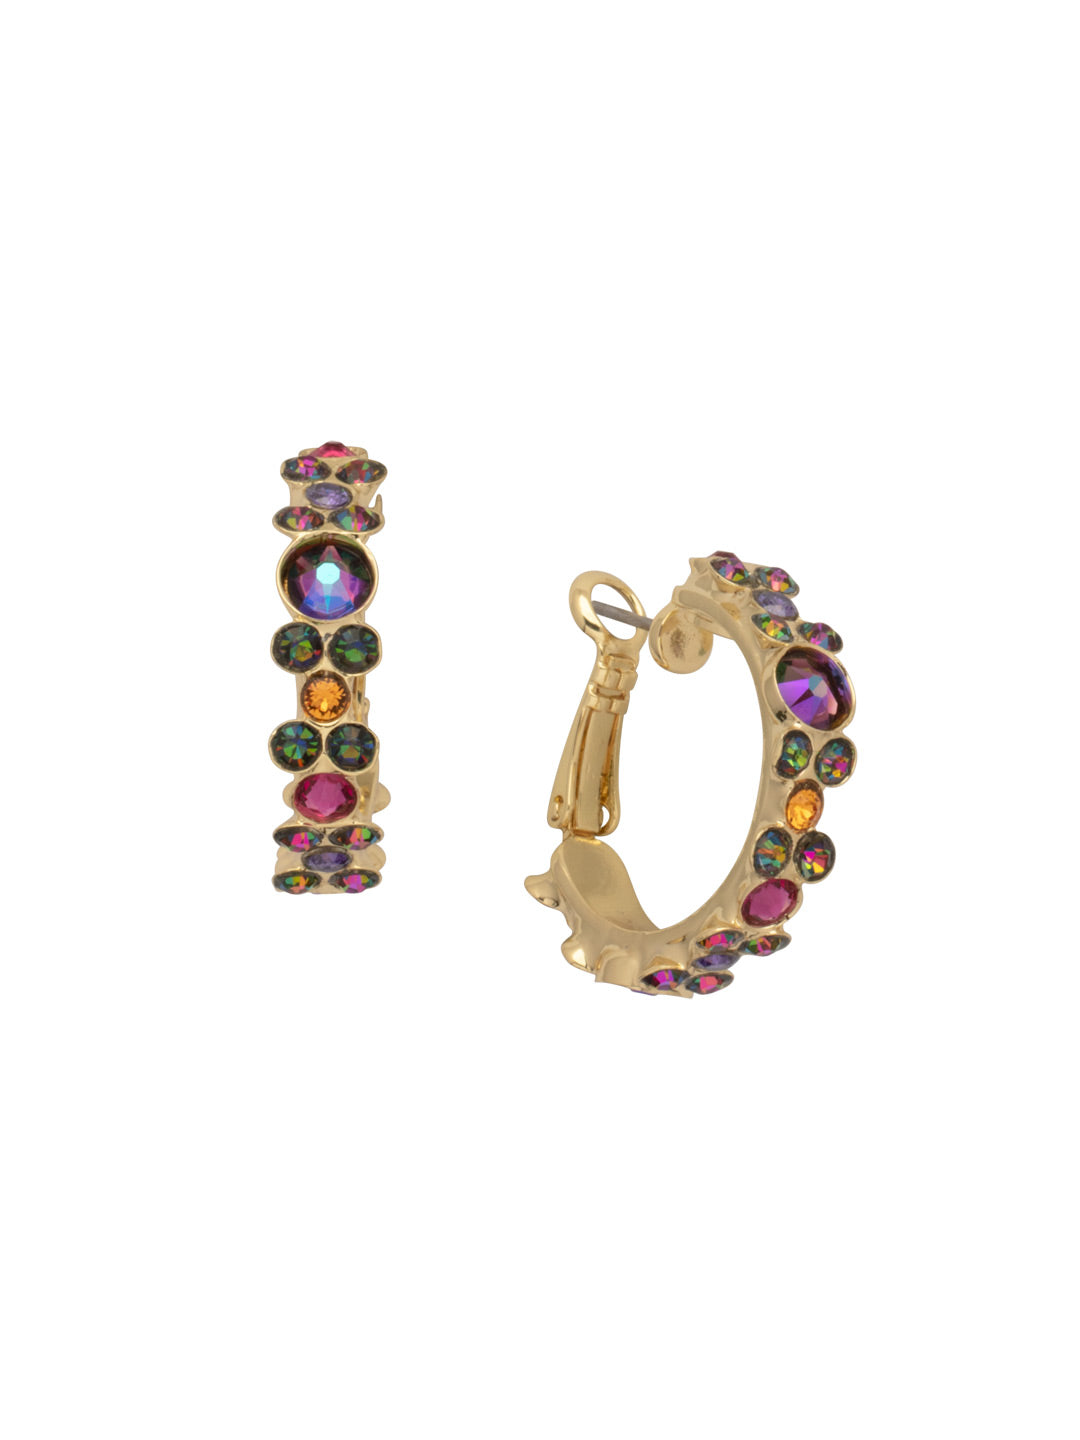 Floral Hoop Earrings - EBP15BGVO - <p>Intricate design, infused with gorgeous shine. A motif of floral clusters is featured here on a small, delicate hoop with a hinged post backing. From Sorrelli's Volcano collection in our Bright Gold-tone finish.</p>